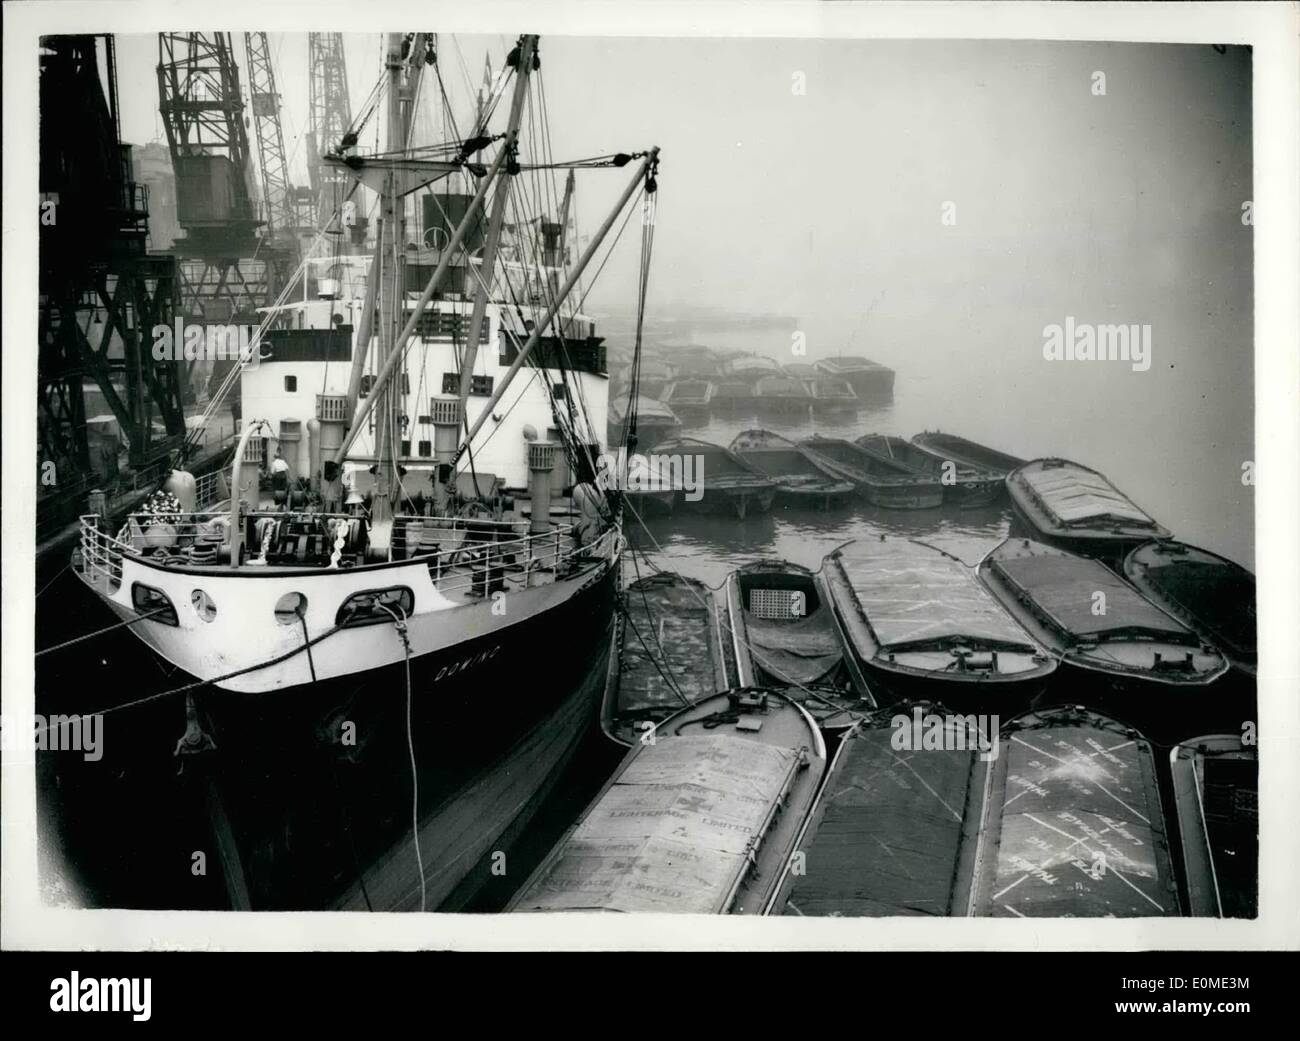 Nov. 11, 1954 - The Dock Strike Threatens To Spread. Idle Shipping In The Pool Of London: Many crowds of idle dockers - and dozens of idle ships were to be seen in the Tooley Street, Bermondsey - wharf area this morning - following the strike of 2,500 dockers who refused to work on lorries driven by non-Union men - or those who worked during the big October Strike. Many efforts are being made to get them to return to work. Photo shows The scene in the Pool of London this morning from Tower Bridge showing the idle shipping. Stock Photo